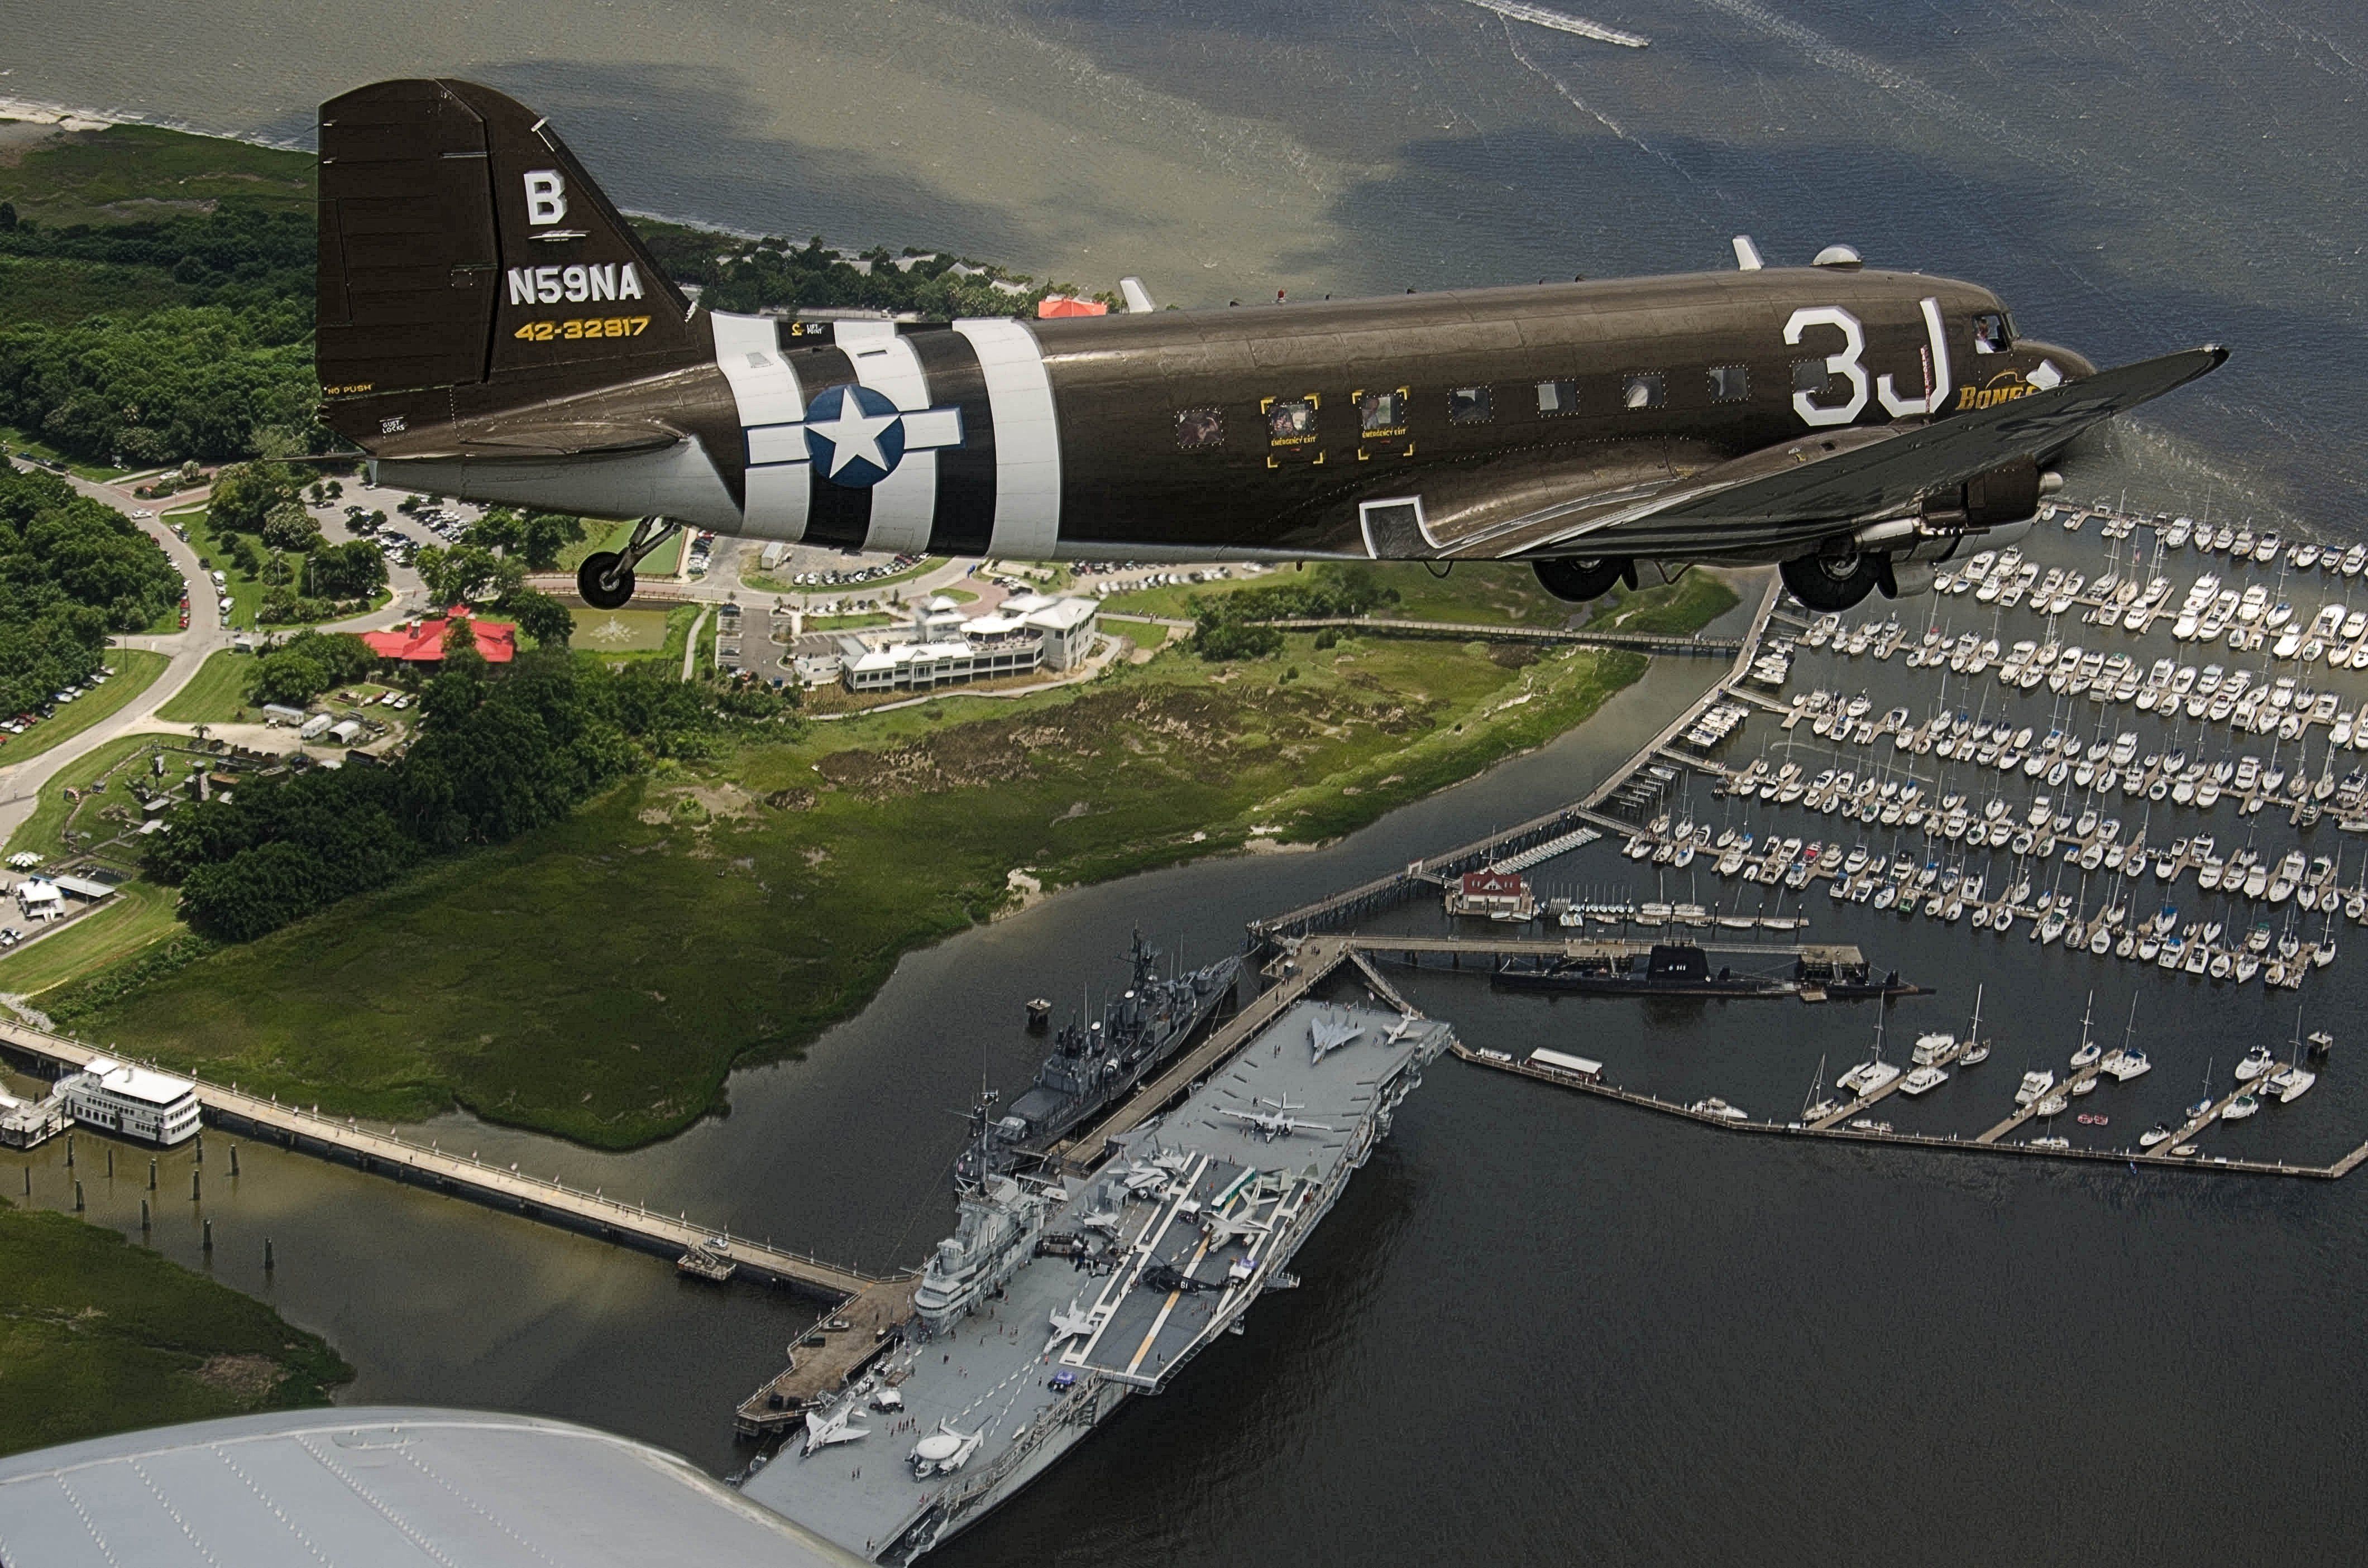 Douglas DC-3 (N59NA) - Taken from North American SNJ-6 Texan during South Carolina Salute From the Shore IV, 04 July 2013.  Over Patriots Point Maritime Museum, Charleston, SC - USS Yorktown (CV-10), USS Laffey (DD-724), and USS Clamagore (SS-343).